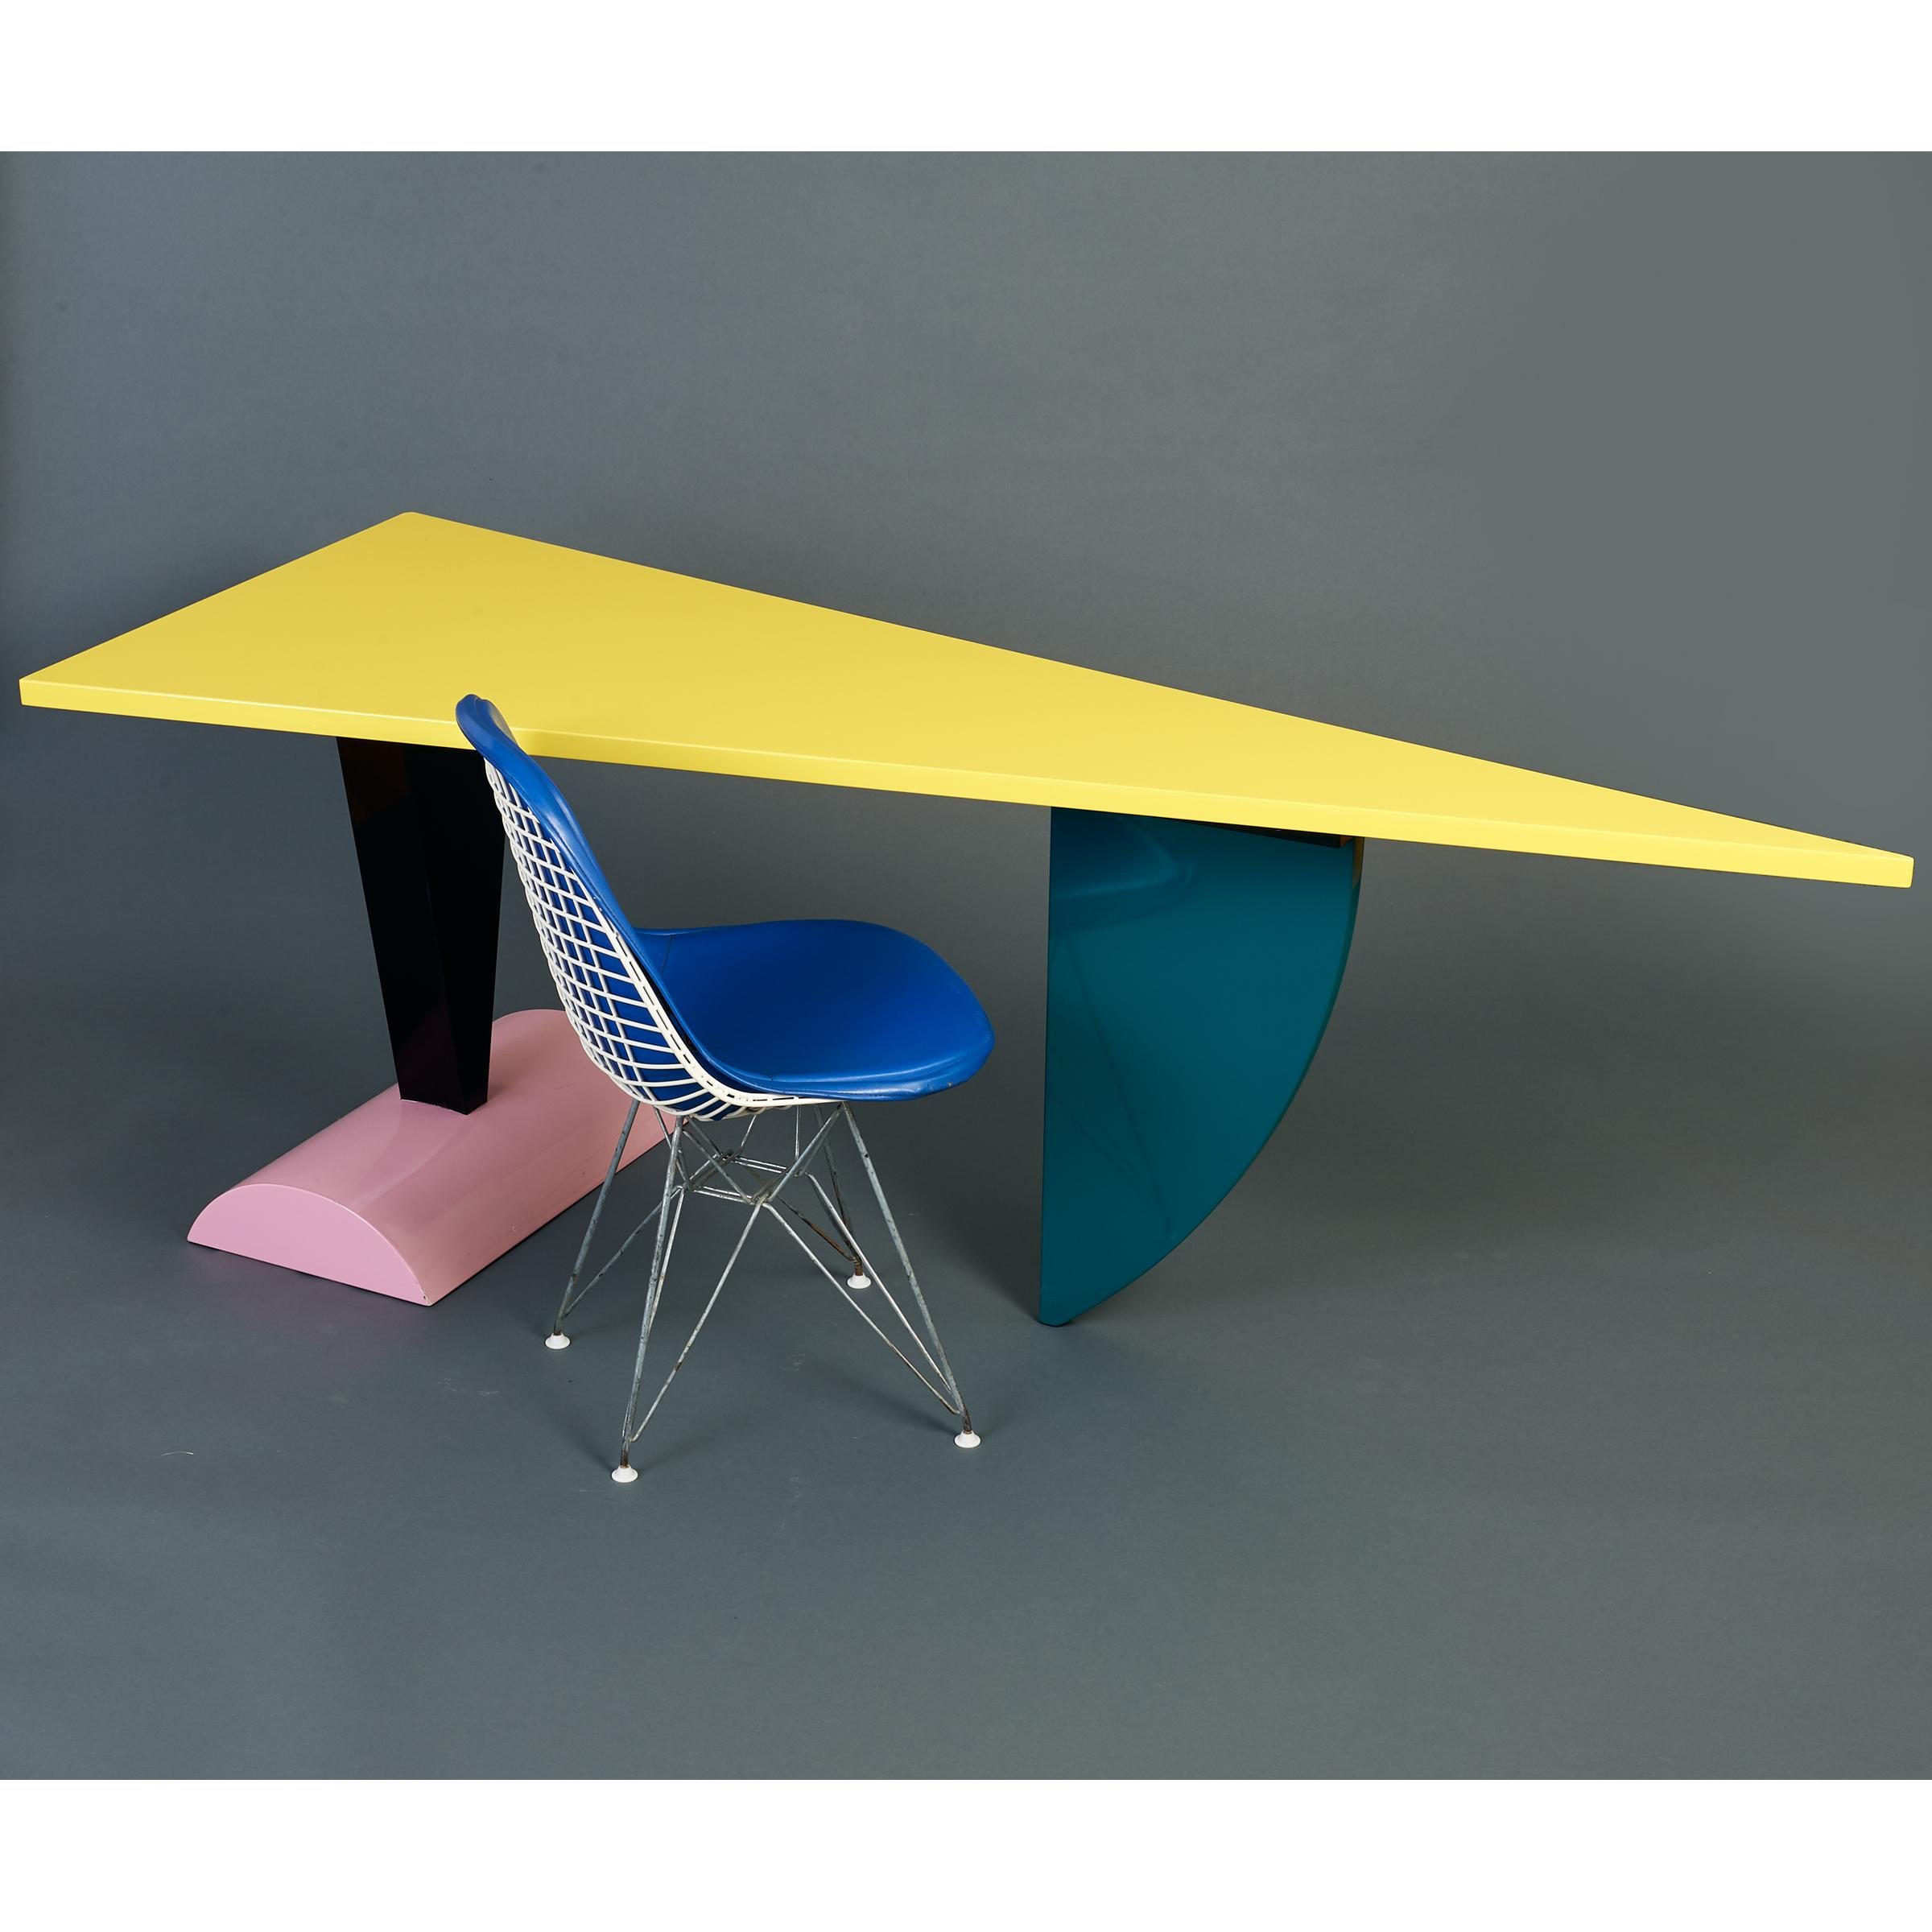 Peter Shire: Original Memphis Milano Brazil Table in Lacquered Wood, Italy 1981 im Angebot 3